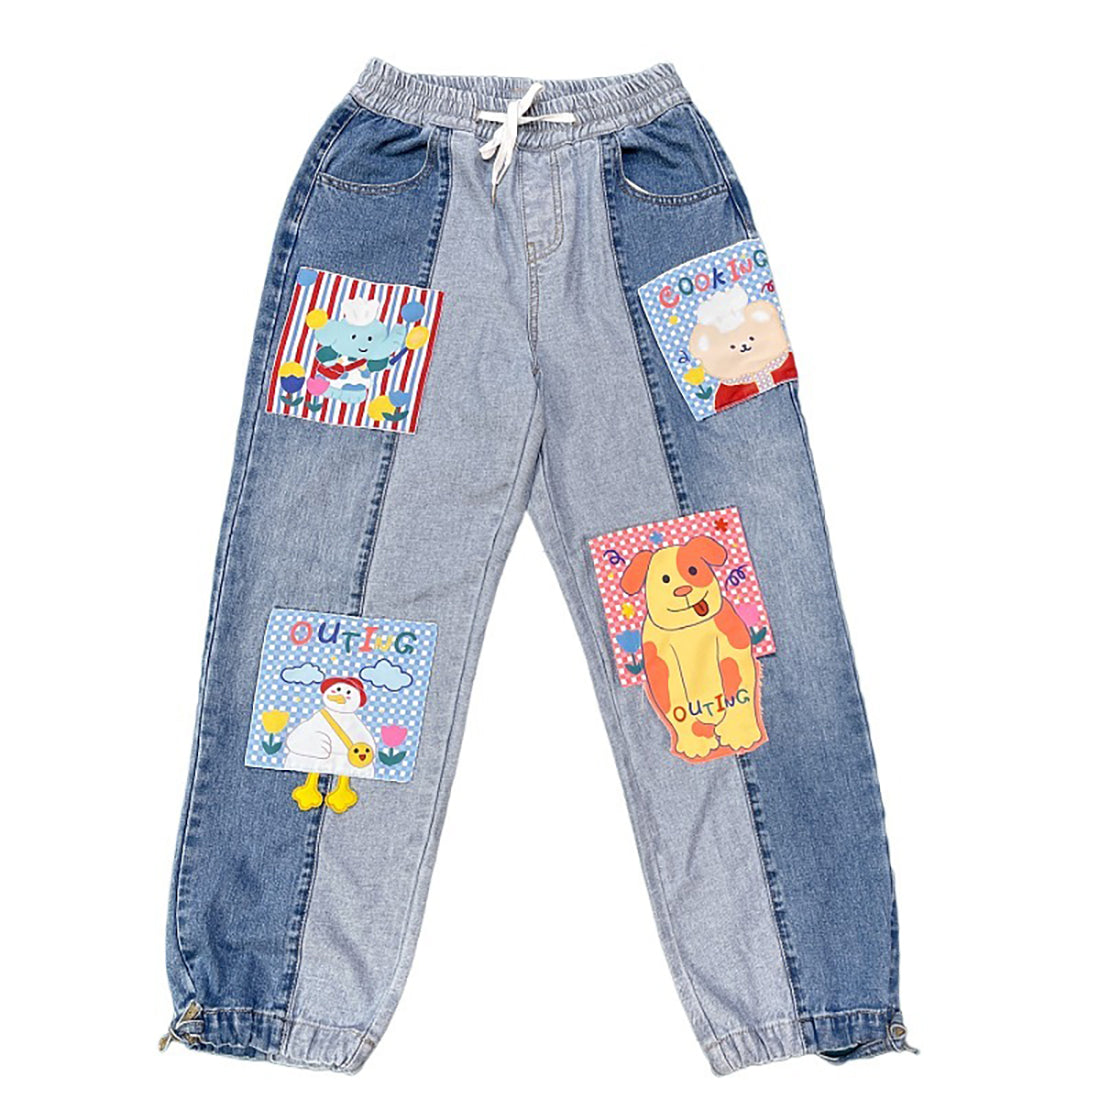 Cartoon painted jeans by kaiclothe